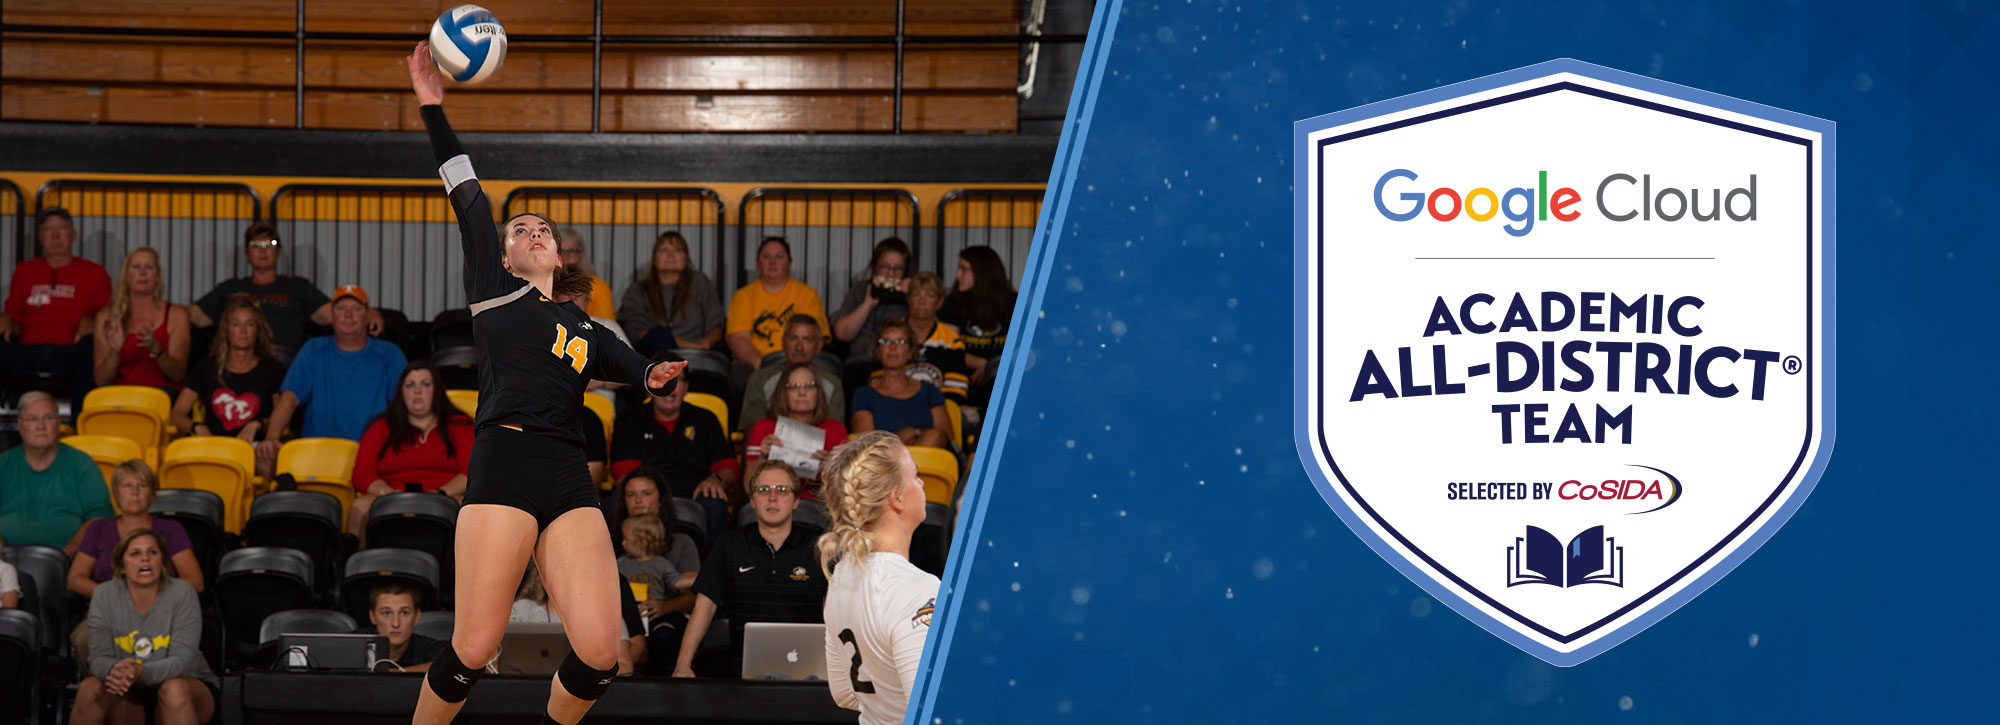 Michigan Tech's Ghormley Named Google Cloud Academic All-District Volleyball Honoree